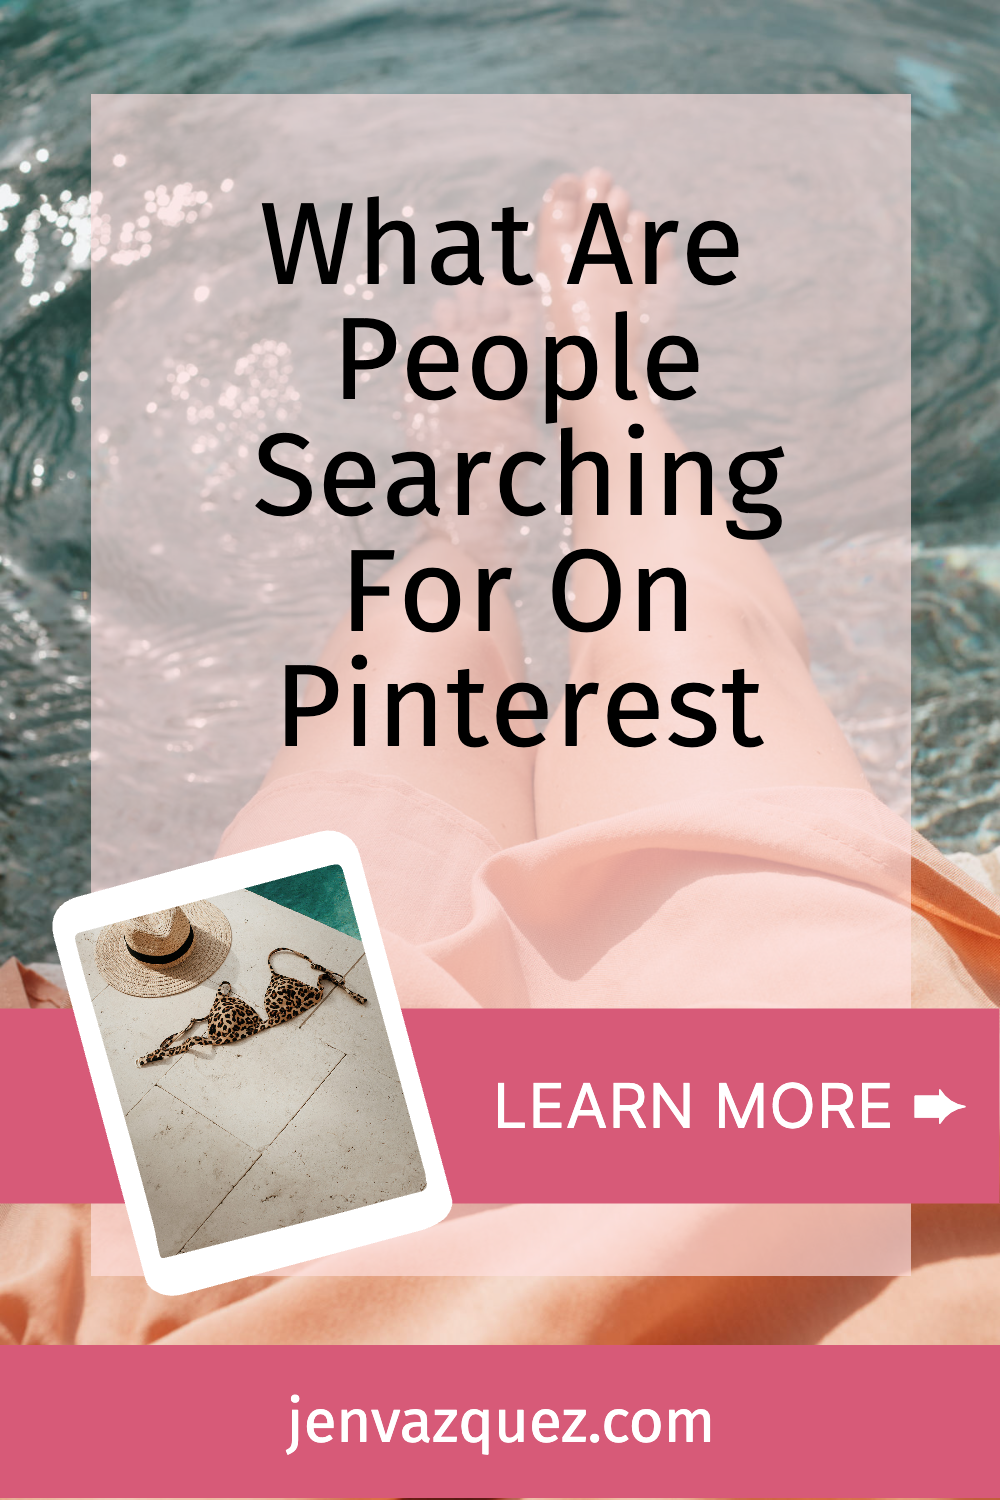 What Are People Searching For On Pinterest by Jen Vazquez Media